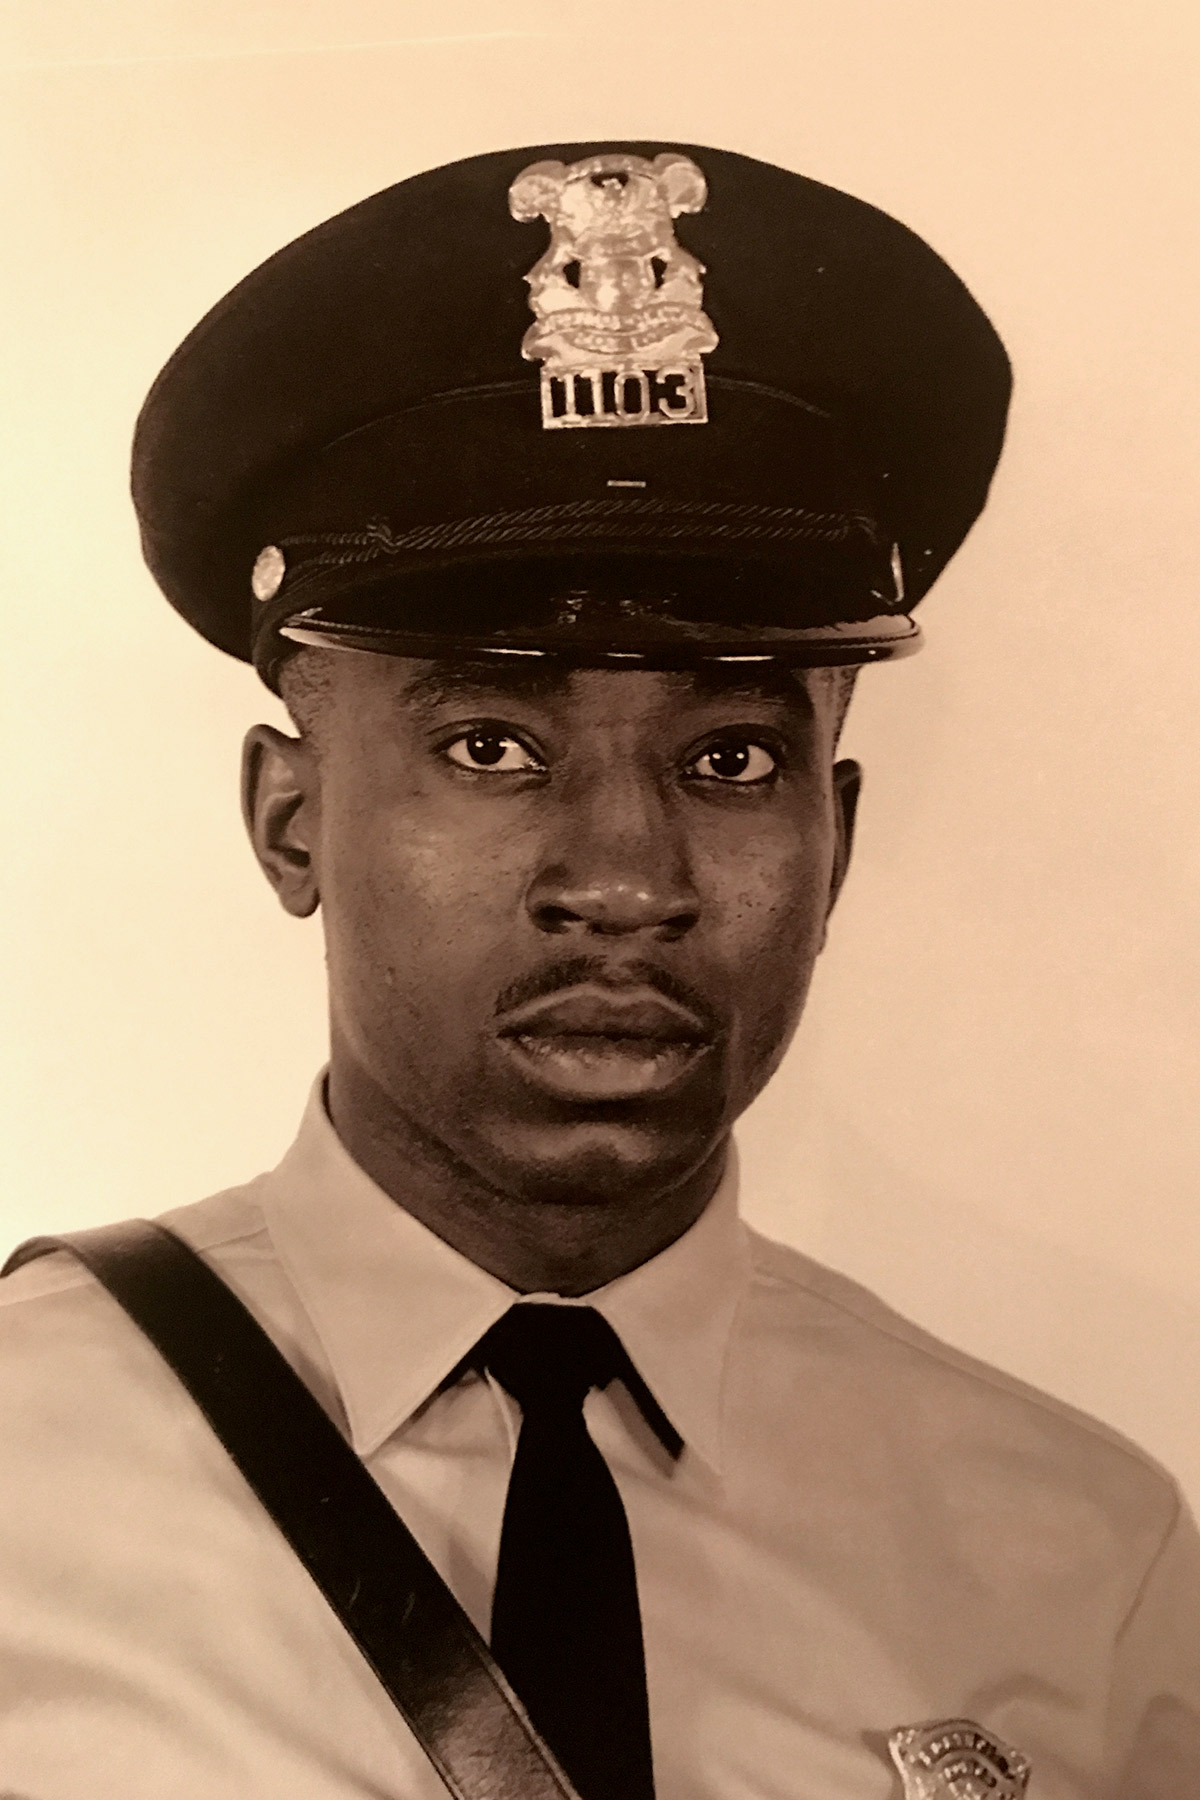 Dallas Police Chief Renee Hall's late father Ulysses Brown.